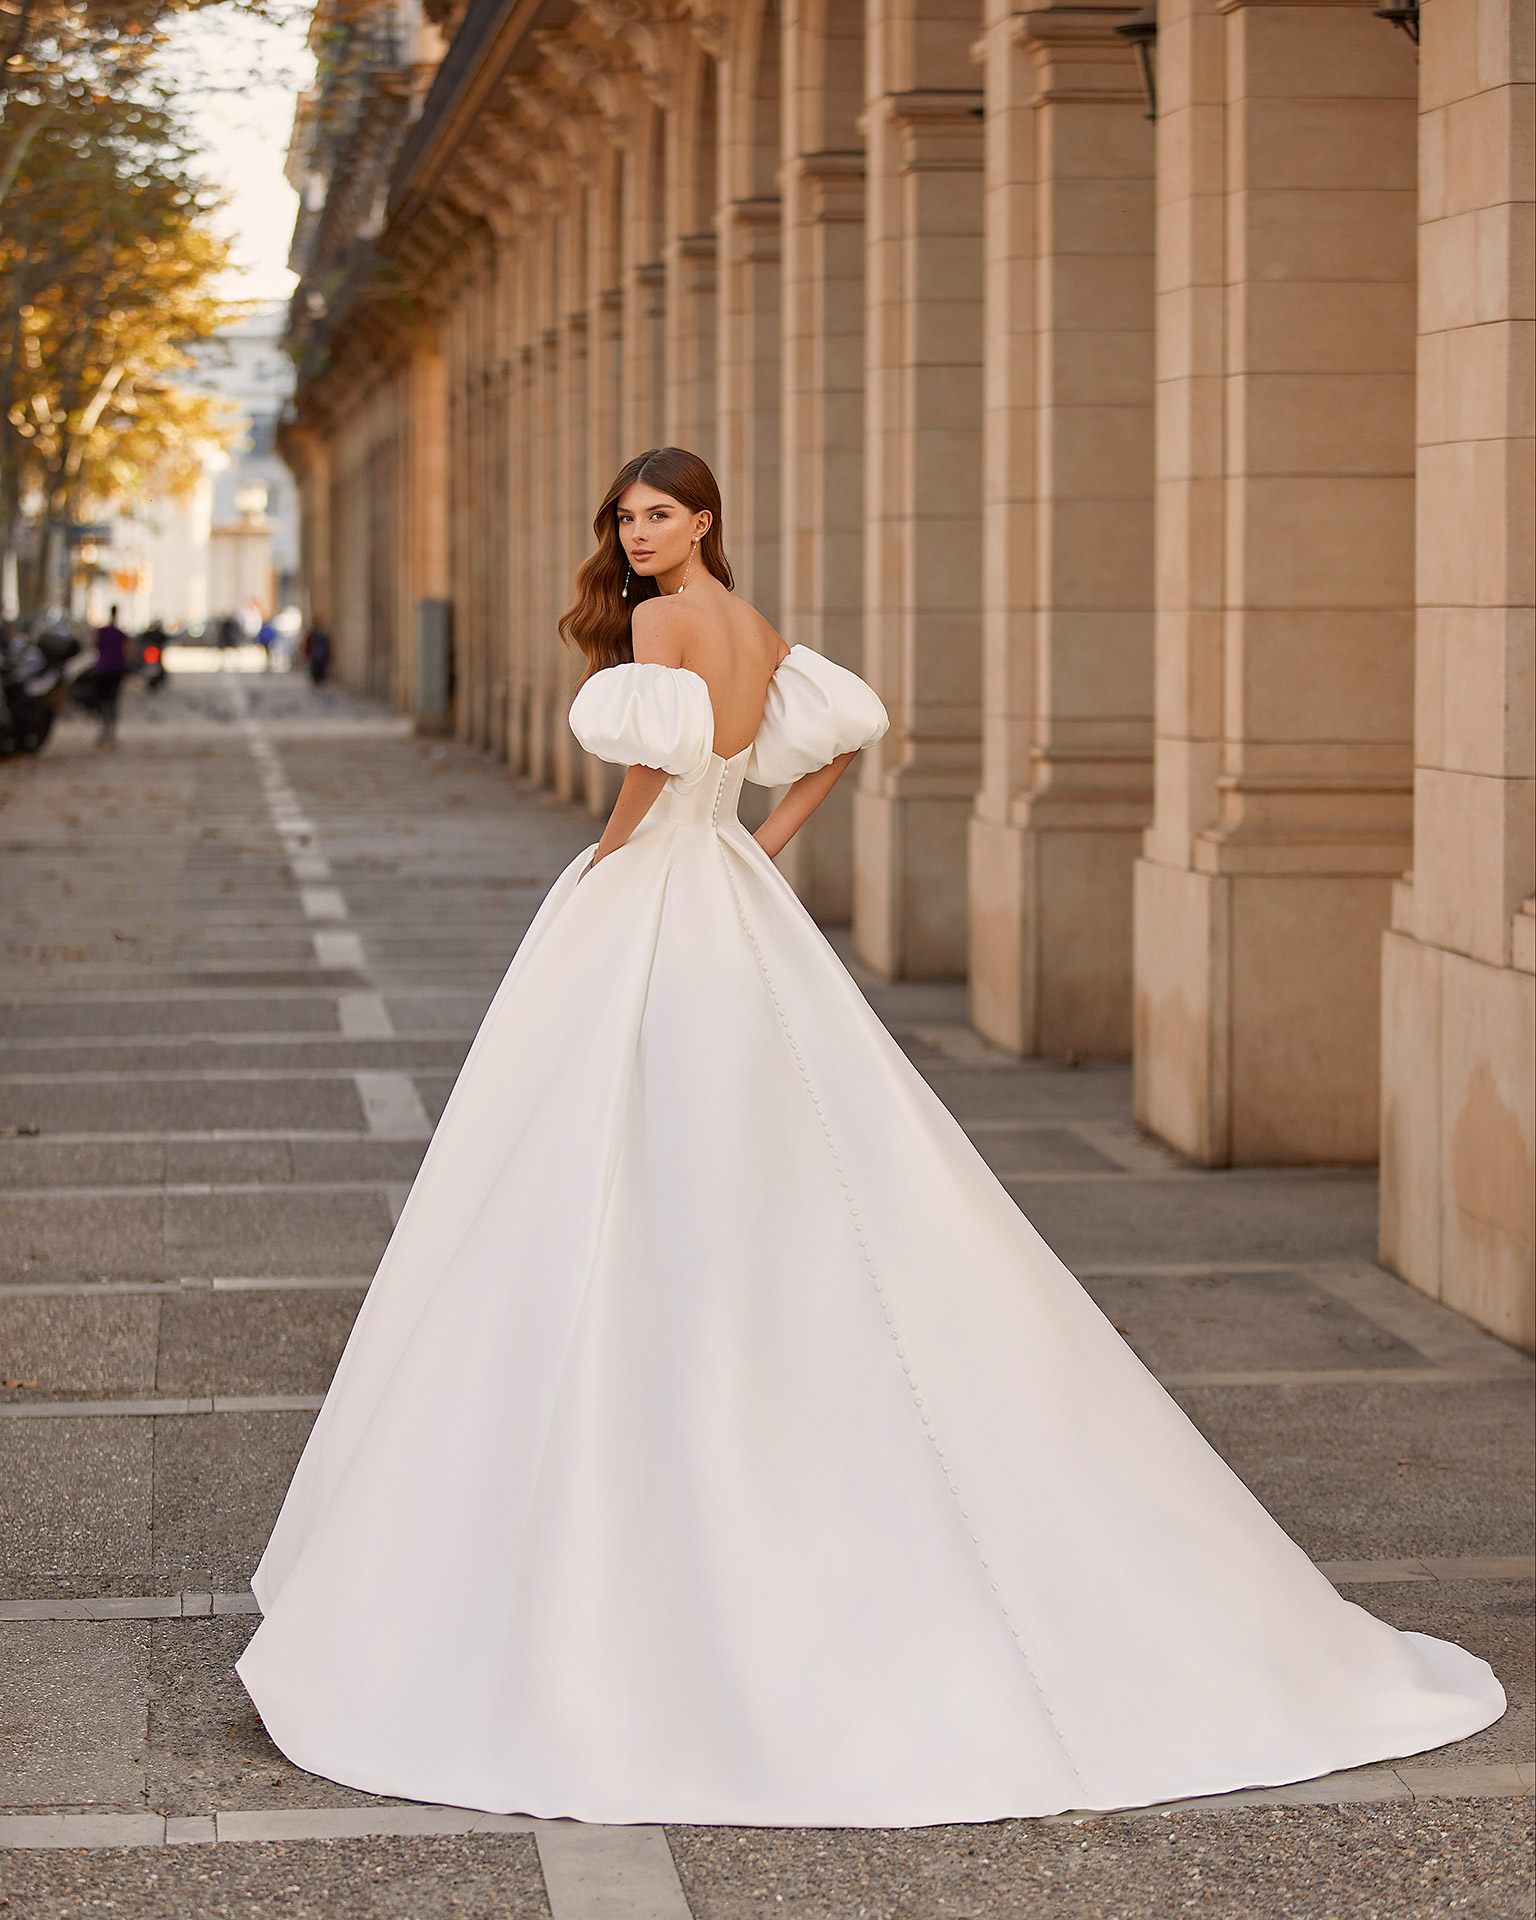 Classic princess-style wedding dress, made of matt Mikado, with a voluminous sheath-style skirt; with a strapless neckline, a buttoned back down to the end of the train, and puffed sleeves. Dreamy Luna Novias dress made entirely of Mikado. LUNA_NOVIAS.